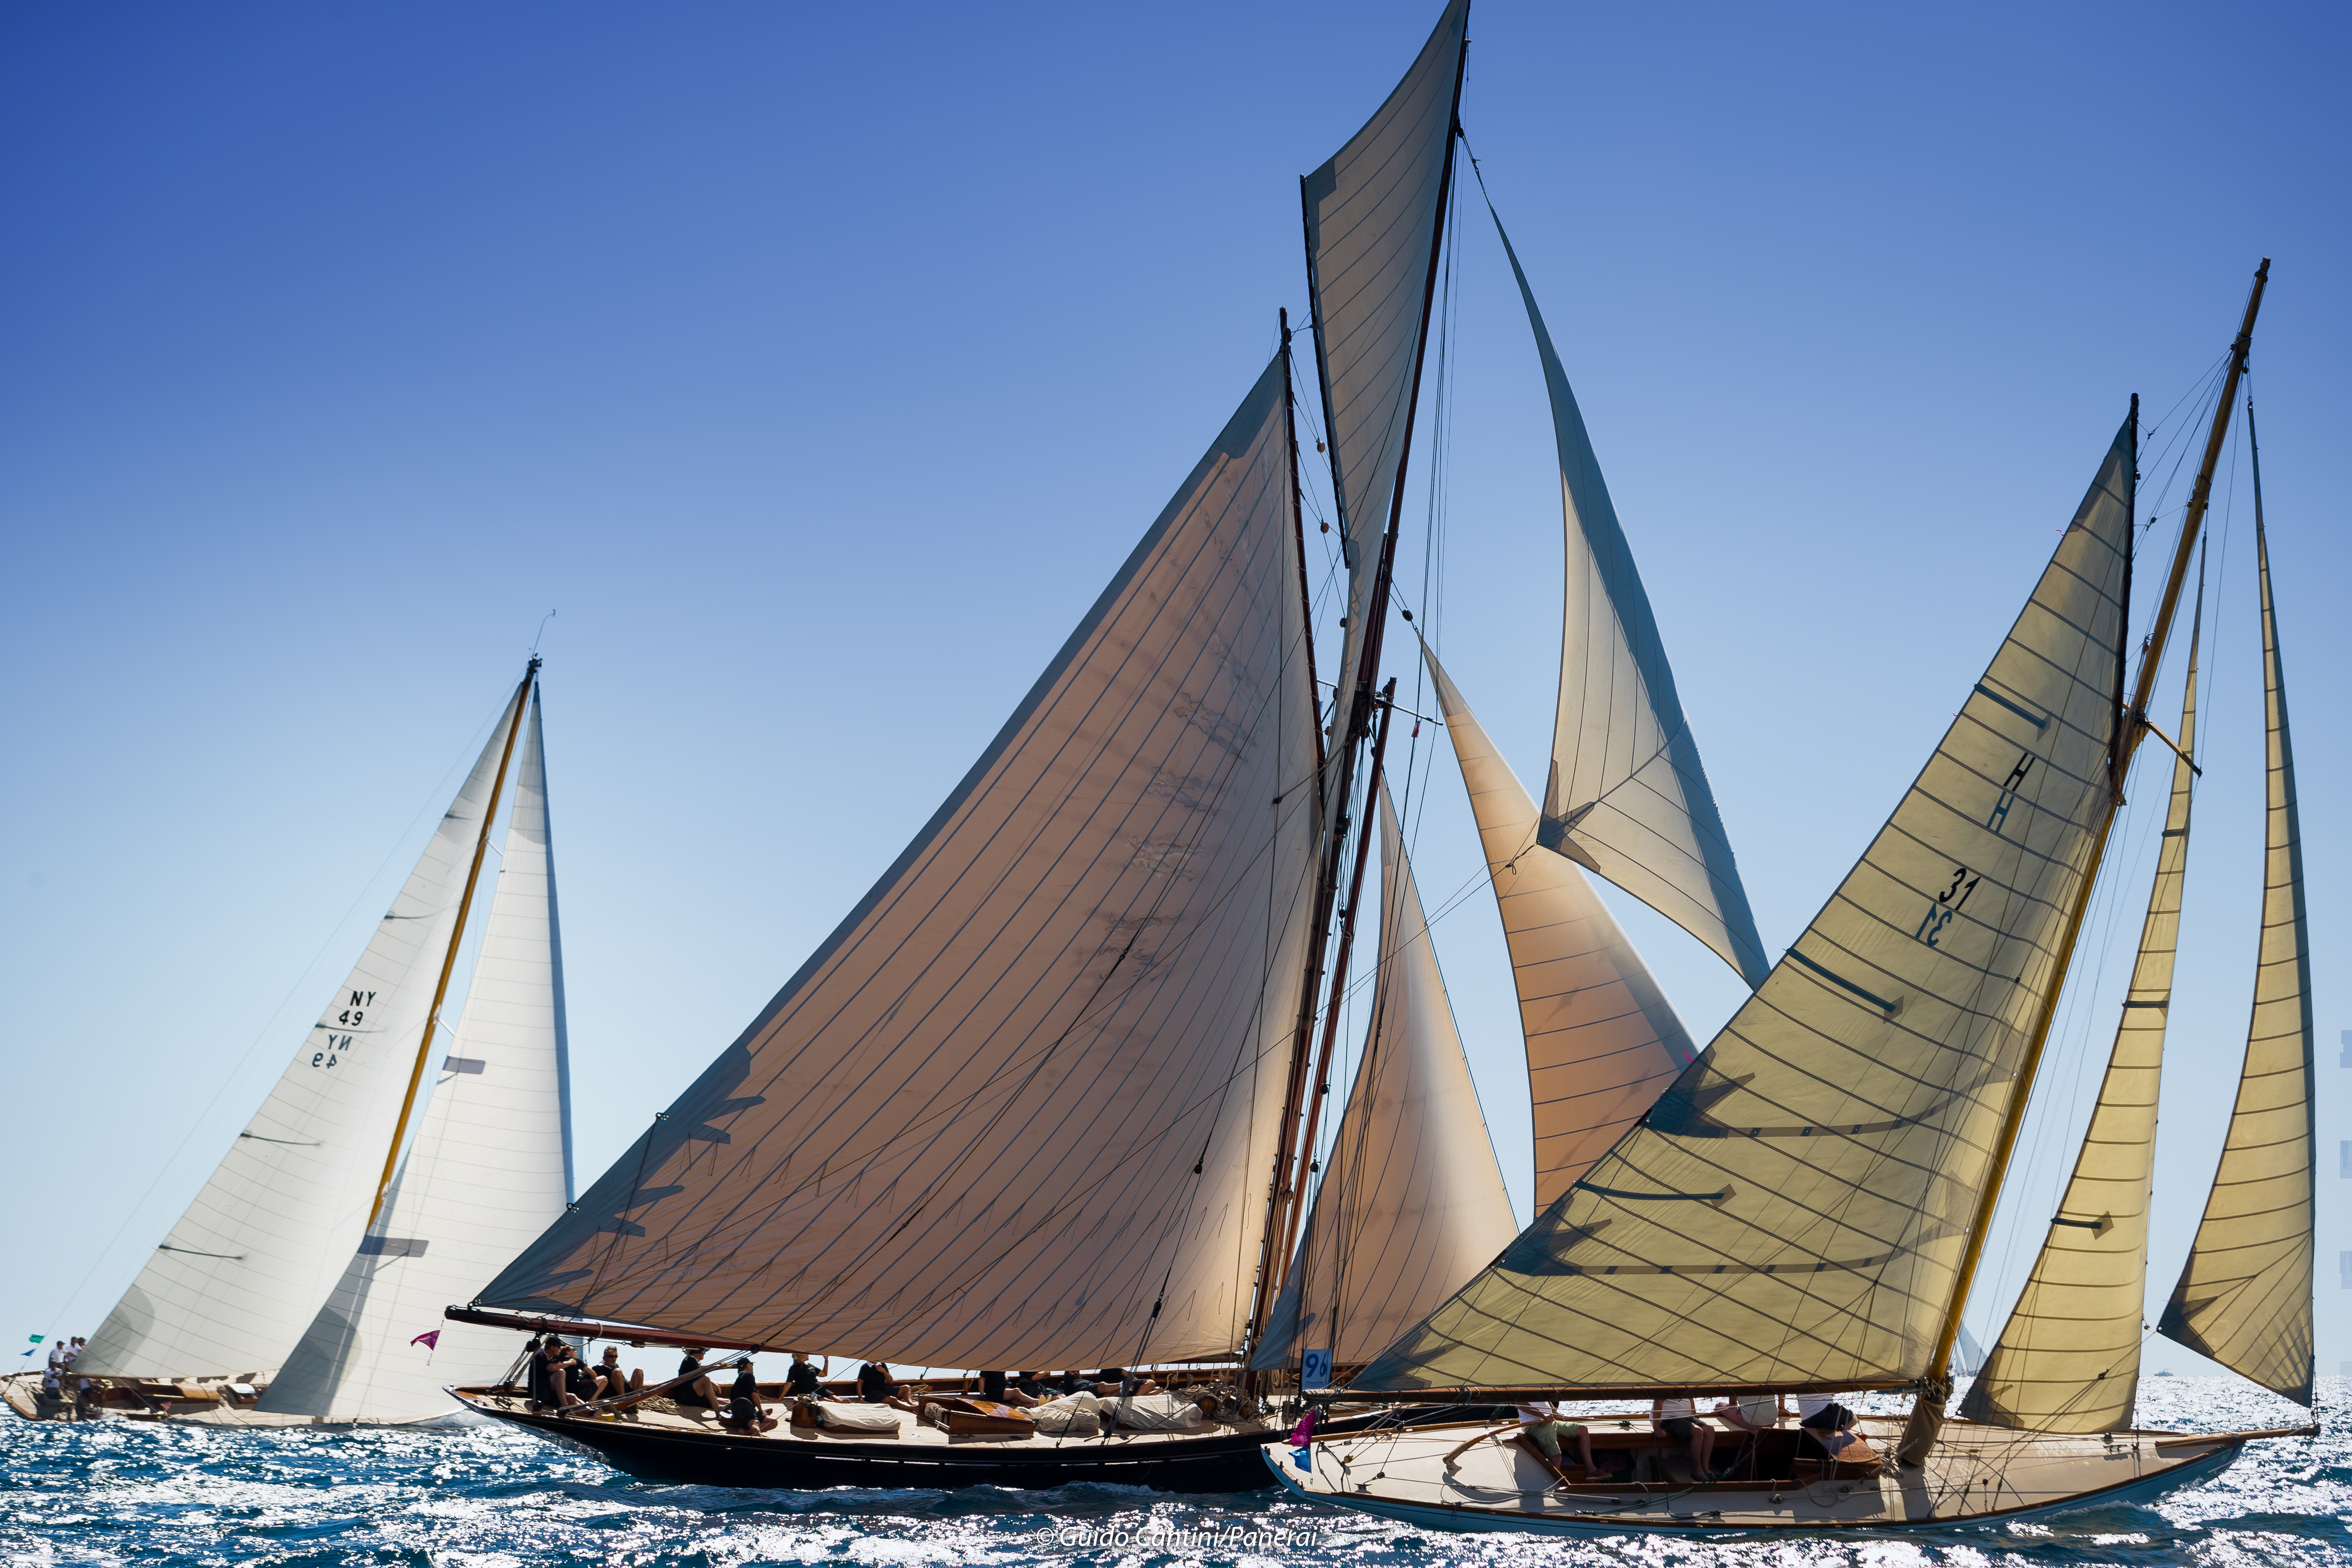  Dragon, Classic Yachts  Regates Royales  Cannes FRA  Day 4, the Swiss